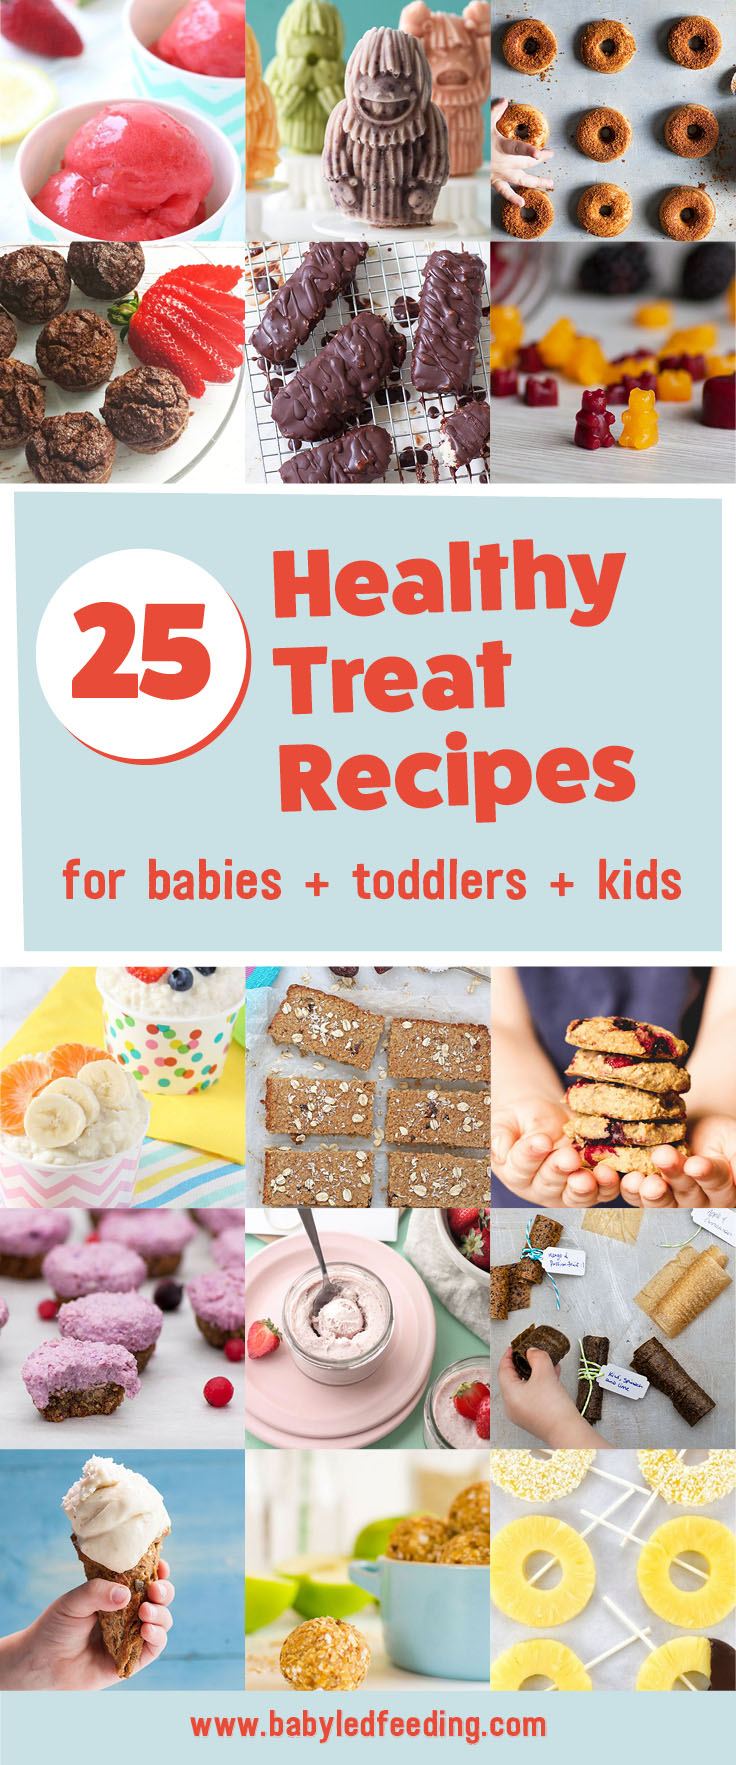 Easy snack recipe for baby led weaning, toddlers, and kids! Healthy treat recipe that are refined sugar free, low sugar, low salt, and packed with whole grains and fruits! No bake bites, healthy doughnuts, homemade fruit roll ups, fruit bars, healthy cookies and more! You can feel good about giving your children these healthy sweet treats! #healthysweets #babyledweaning #kidsnacks #toddlersnacks #babyfood #healthykids 